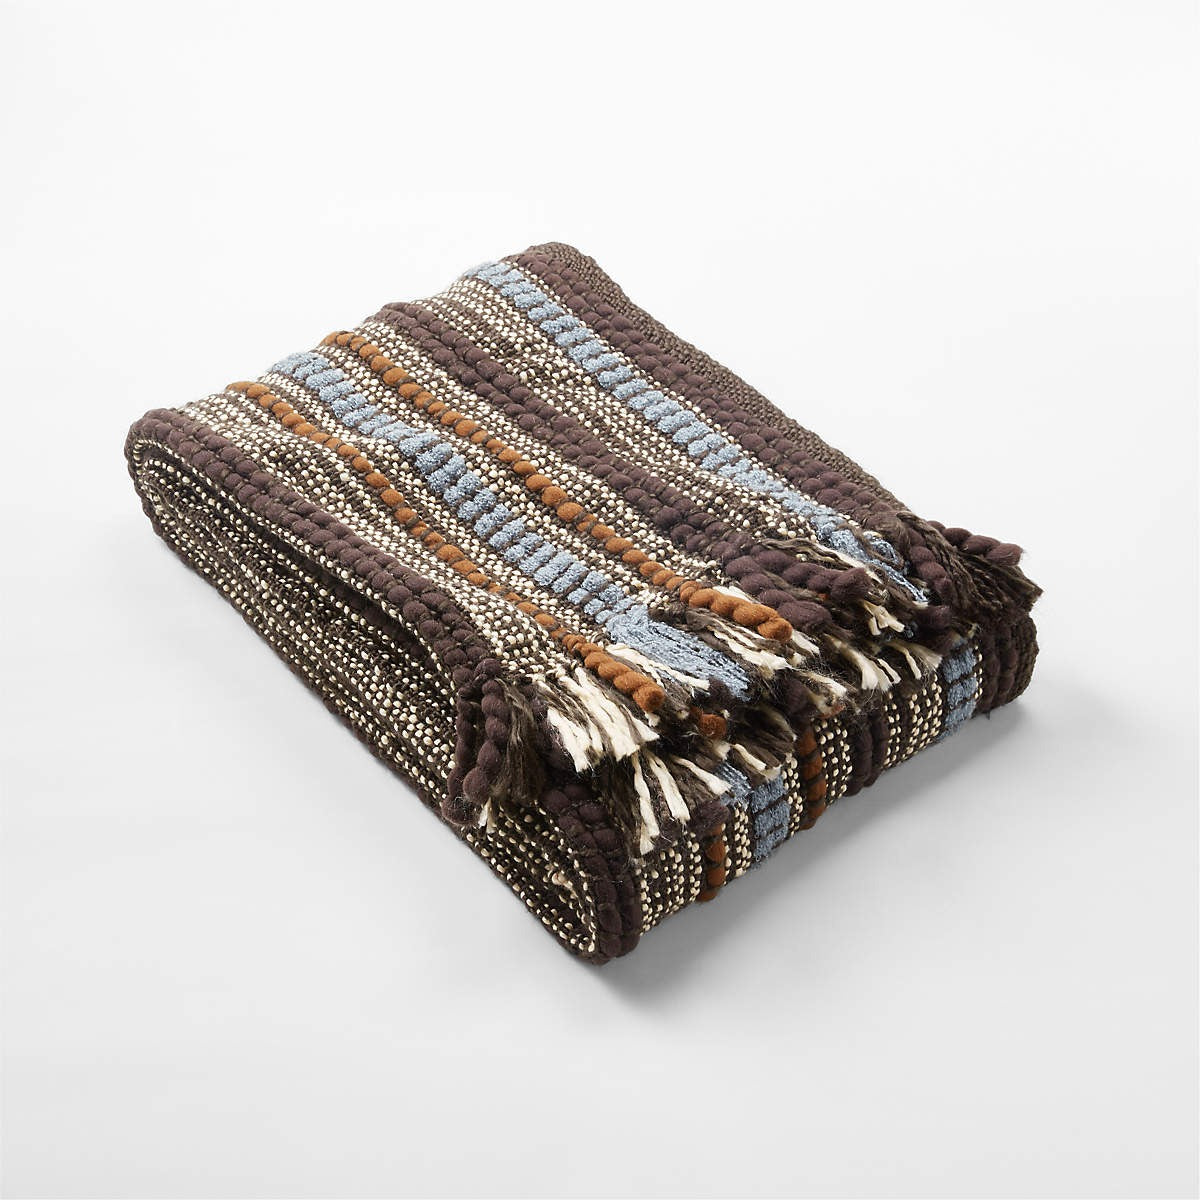 LINEAGE WOVEN THROW